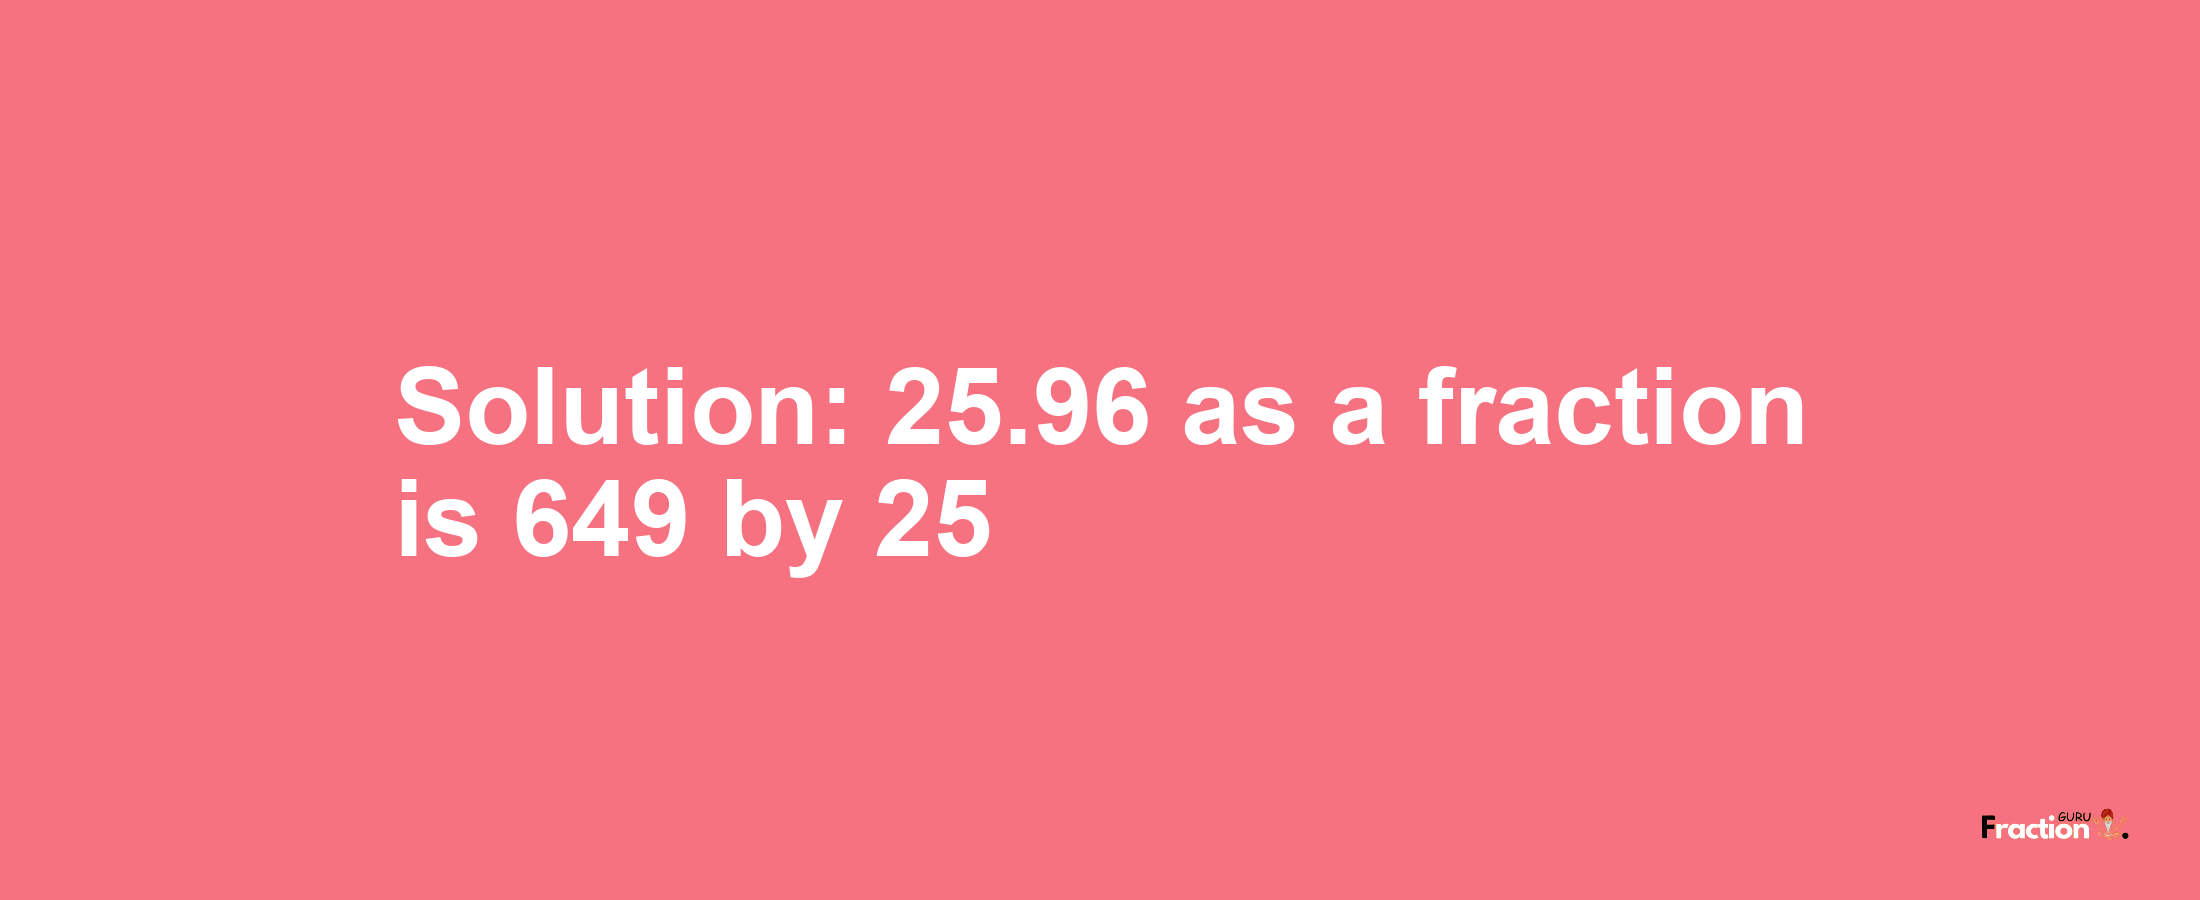 Solution:25.96 as a fraction is 649/25